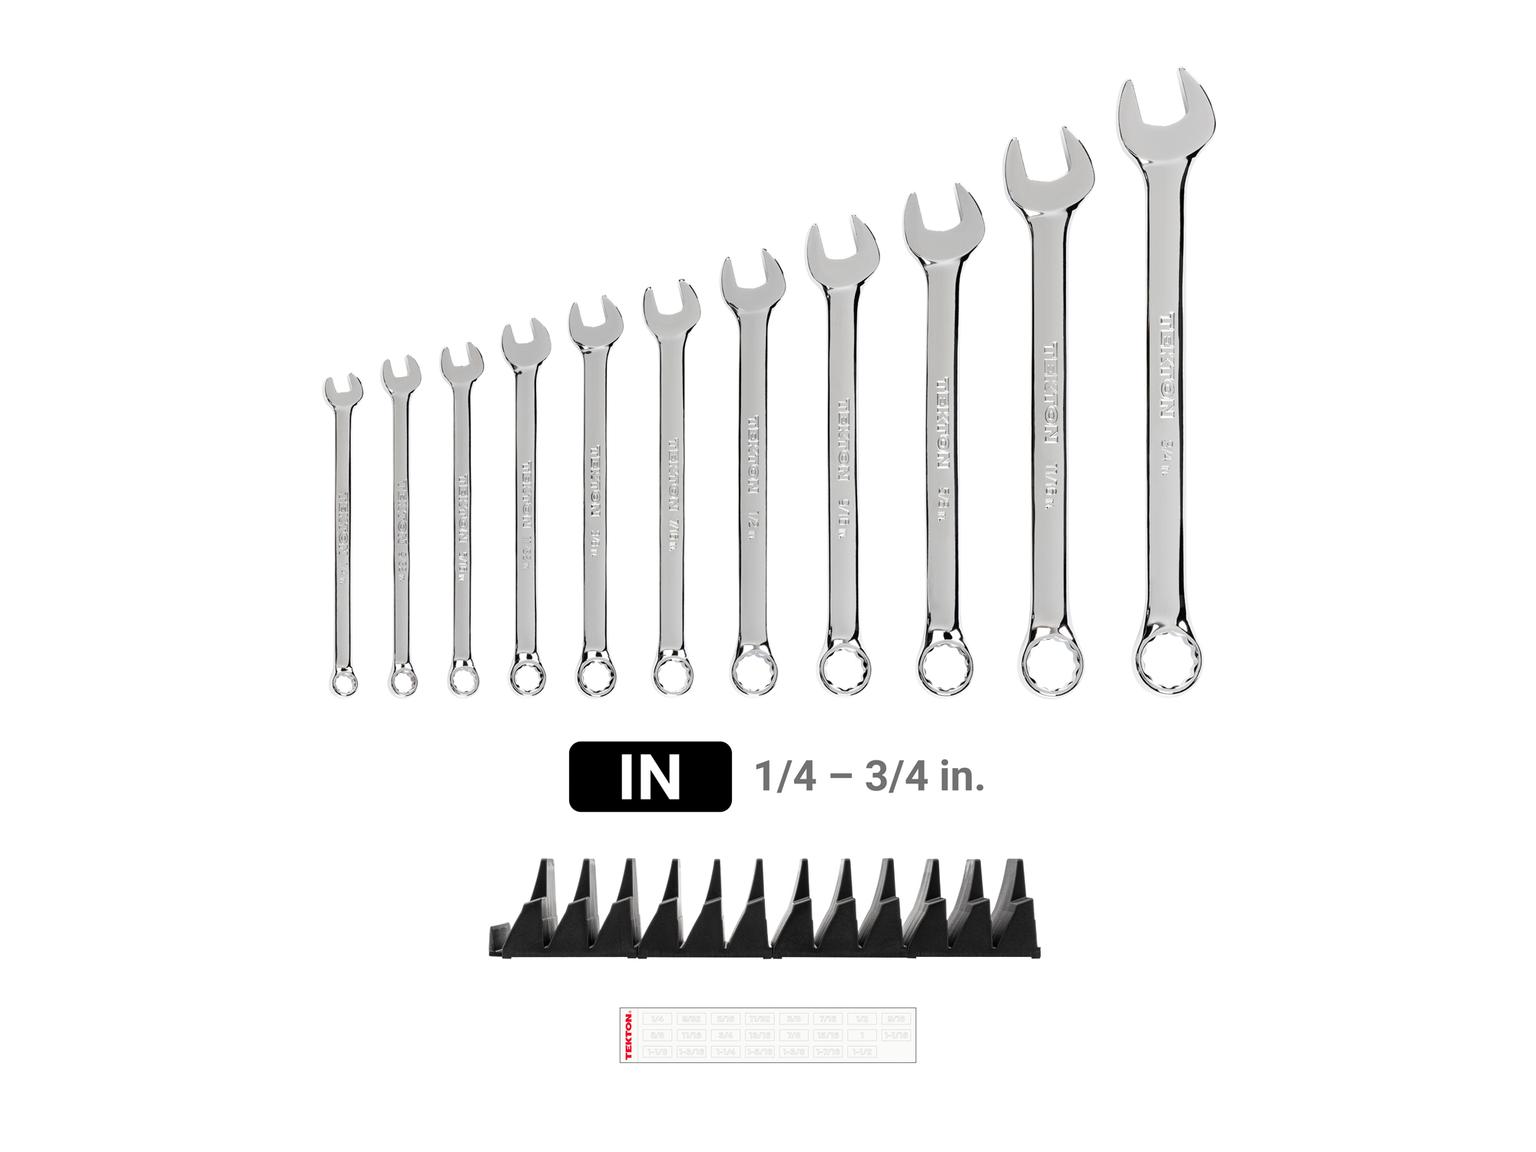 TEKTON WCB95101-T Combination Wrench Set with Modular Slotted Organizer, 11-Piece (1/4 - 3/4 in.)